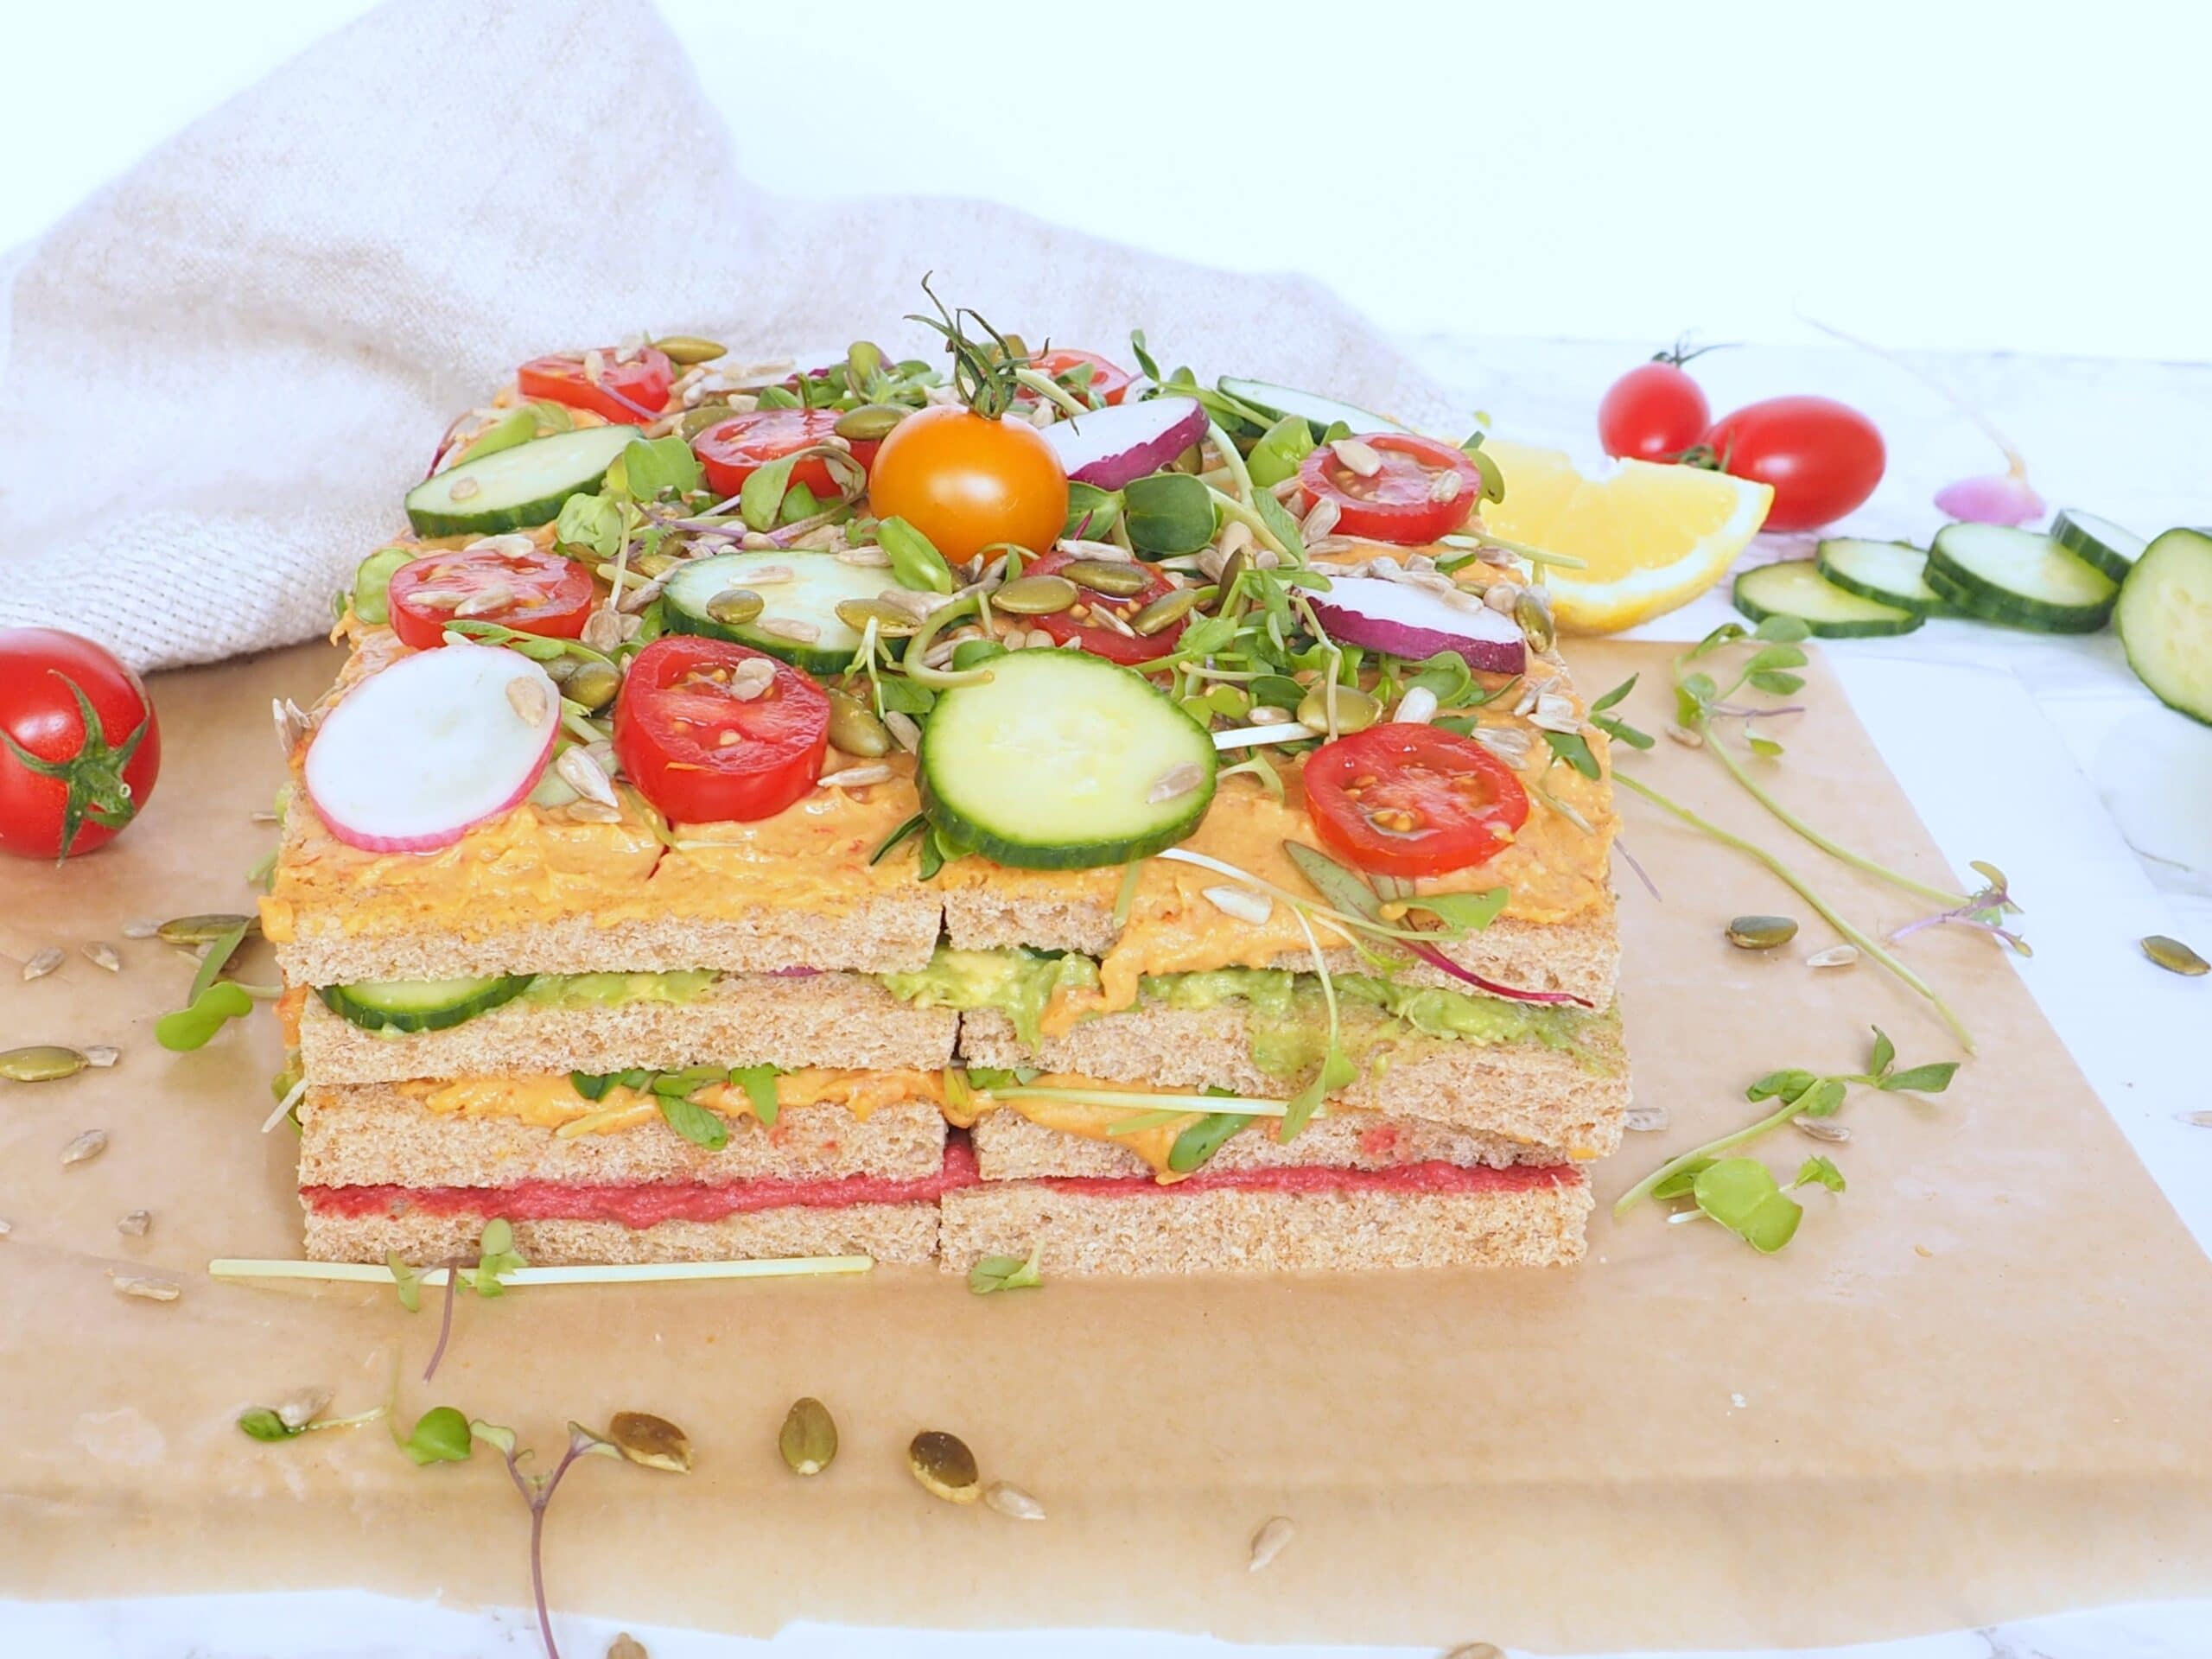 Vegan Sandwich Hummus Cake - Meet the savory hummus sandwich cake, a spin on the classic Swedish sandwich cake, it's made with layers of whole grain bread, hummus, avocado, and veggies. It's a guaranteed scene stealer at your next event and because it requires no cooking, is perfect for hot weather days. Easy to adapt to your favorite fillings and toppings. Let kids make their own version! halsanutrition.com